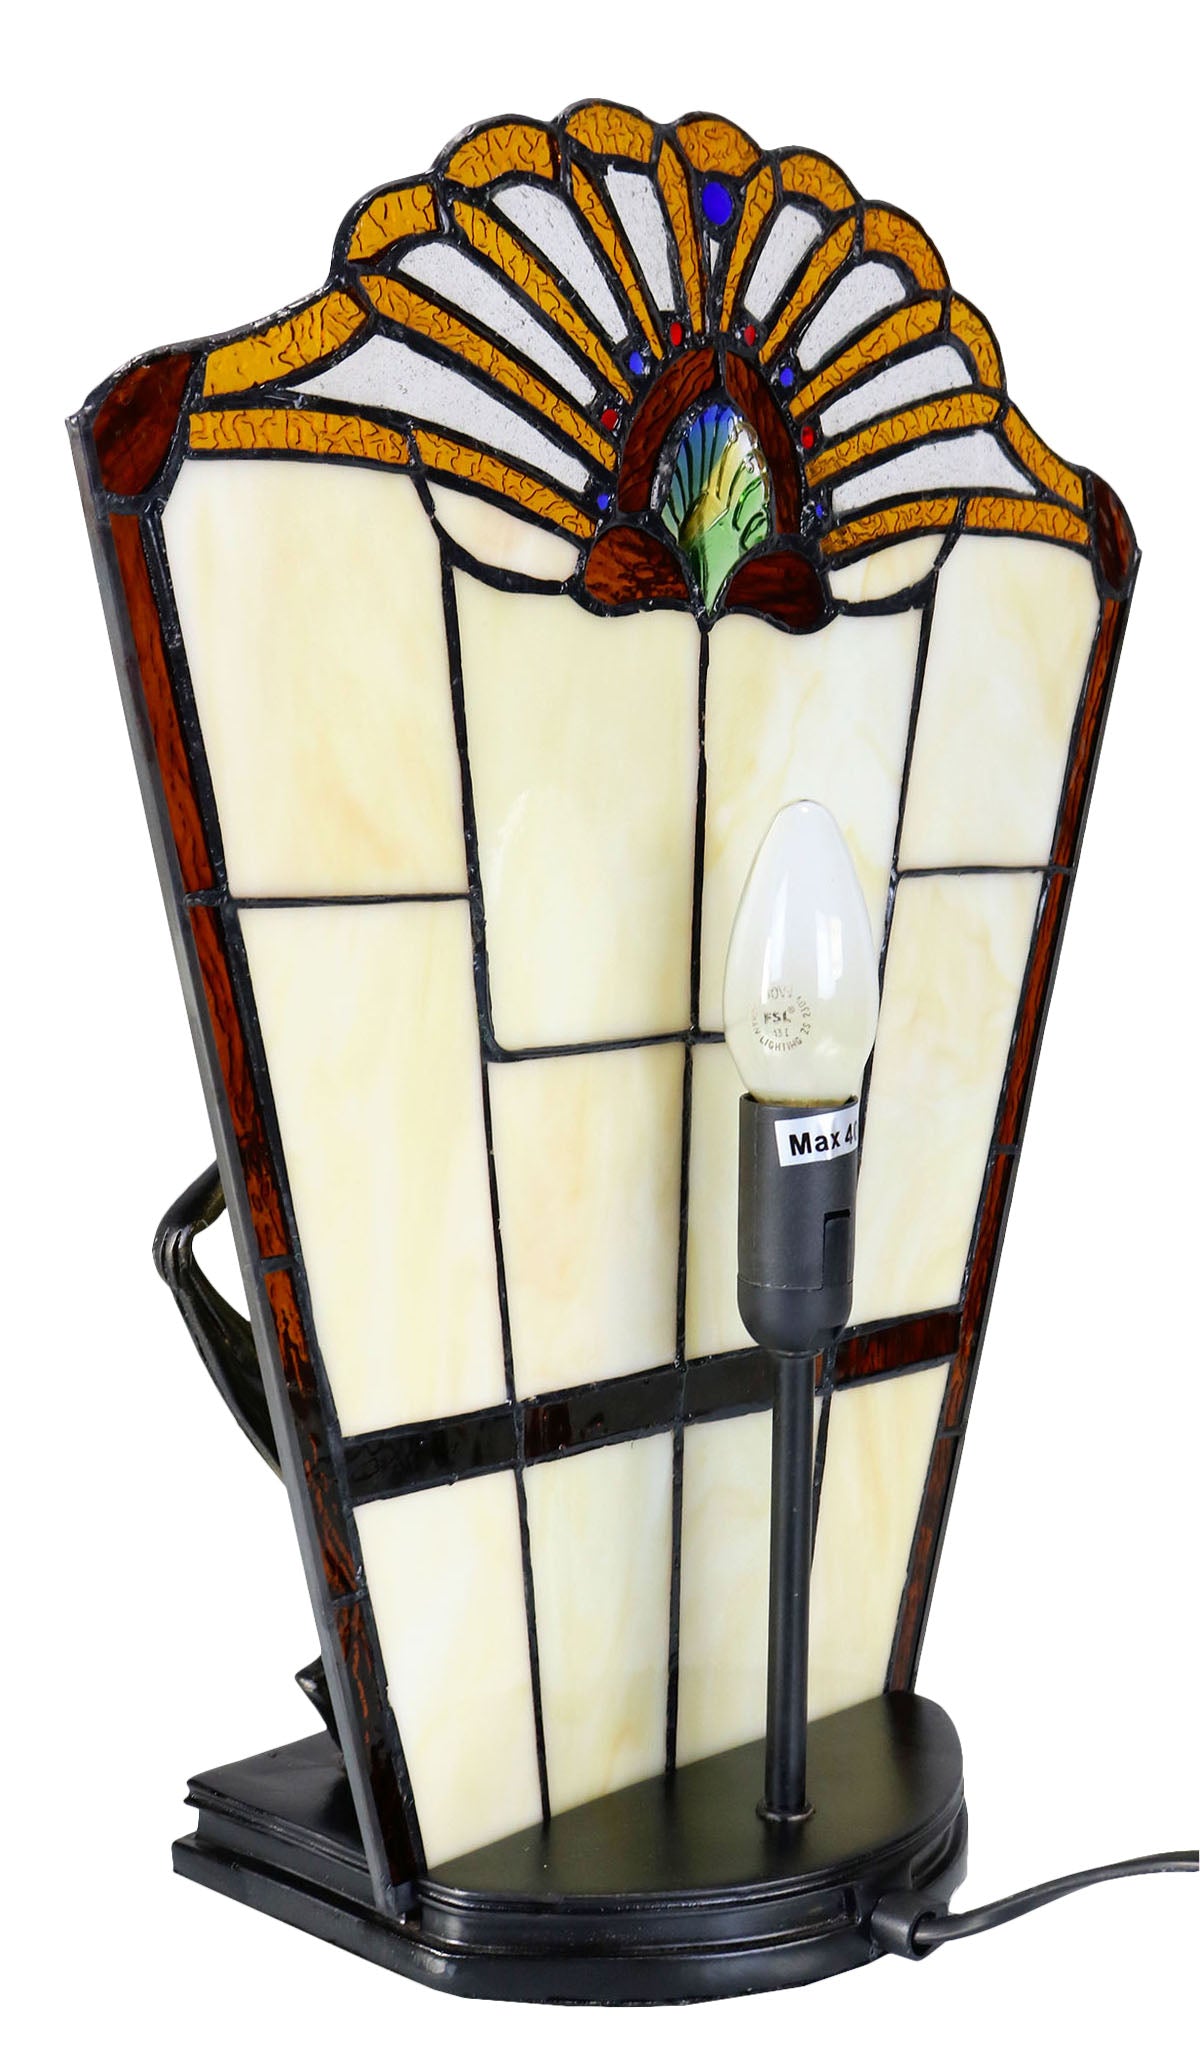 Art Deco Dancer Figurines Tiffany Stained Glass Accent Lamp